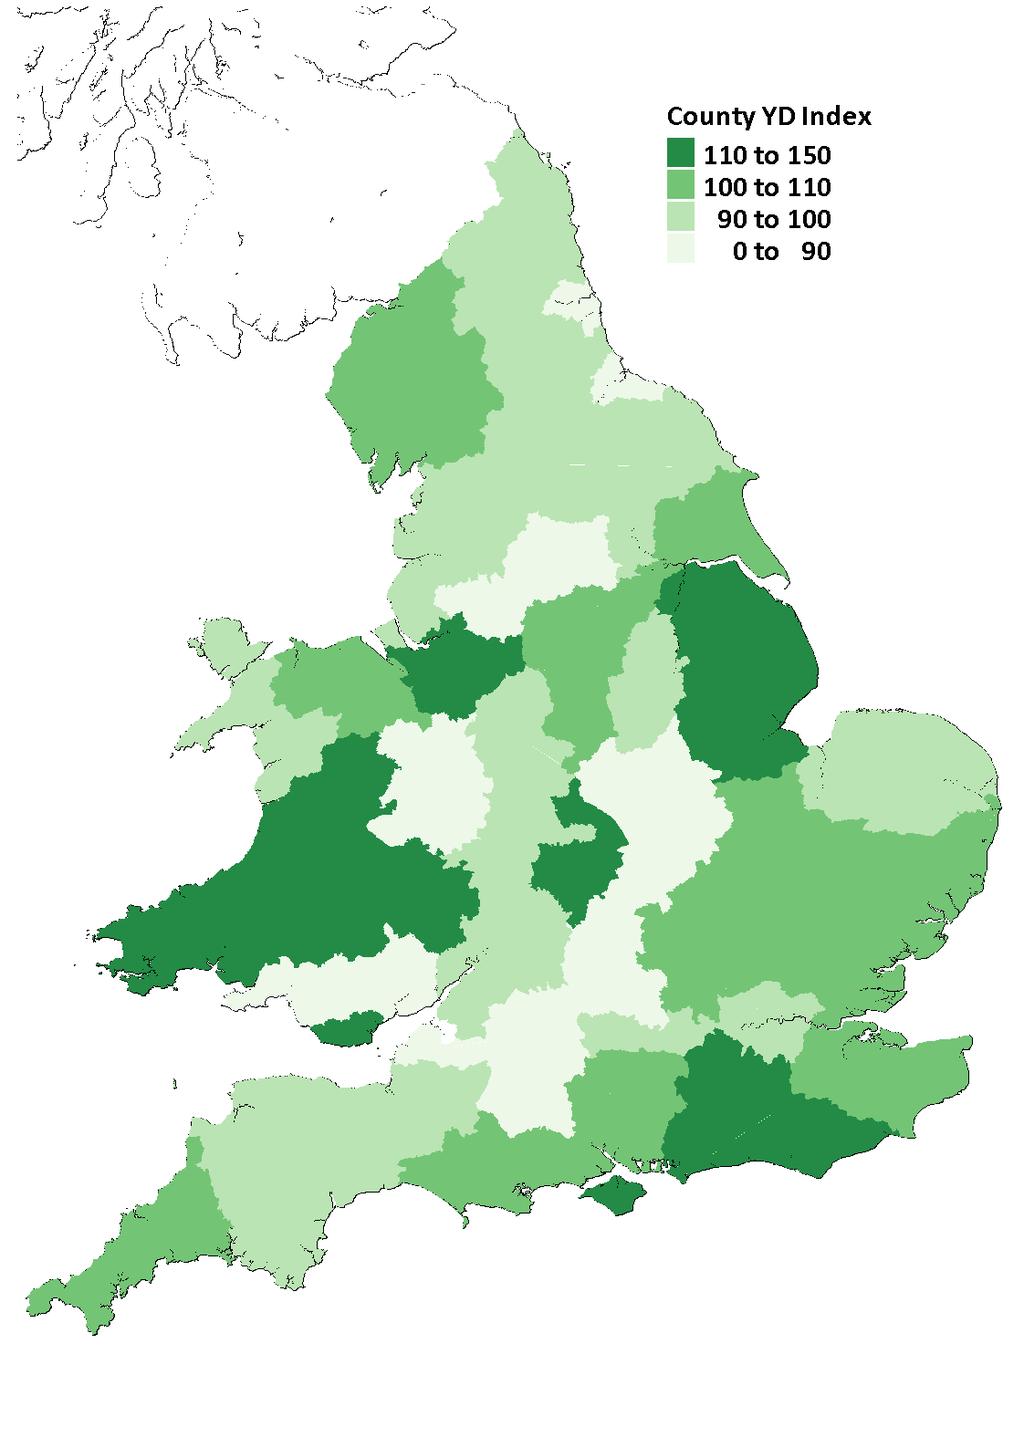 MAP 1 - RURAL YOUNG DRIVER INDICES